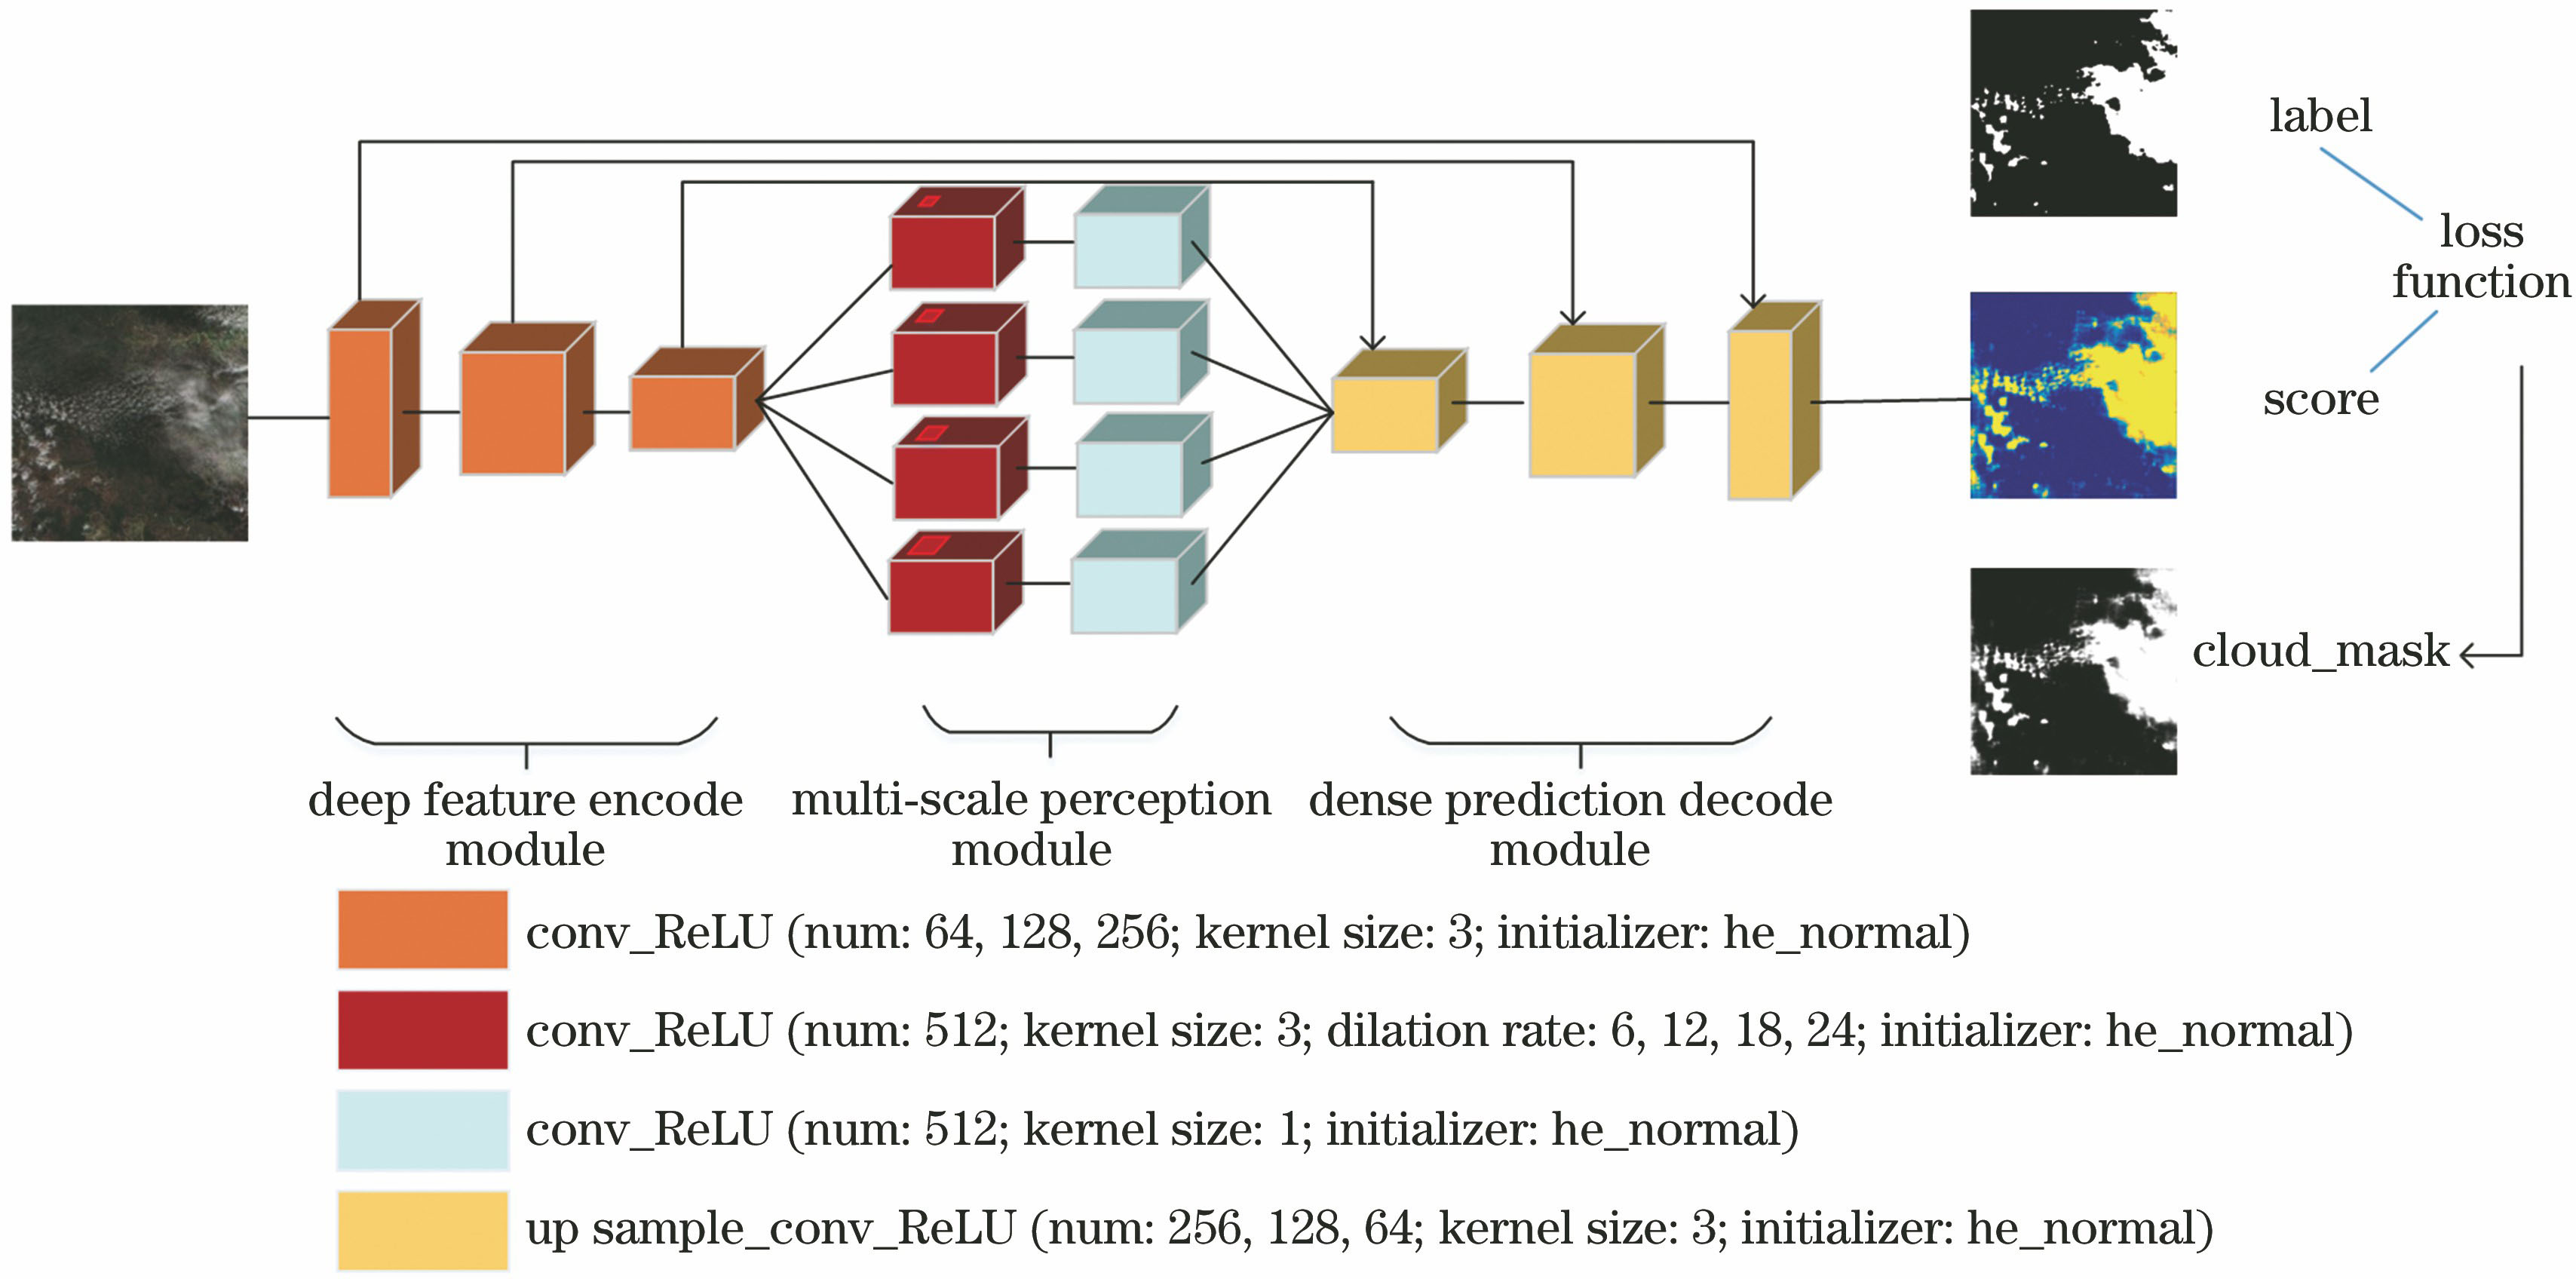 Schematic of deep multiscale dilation fully convolutional neural network architecture